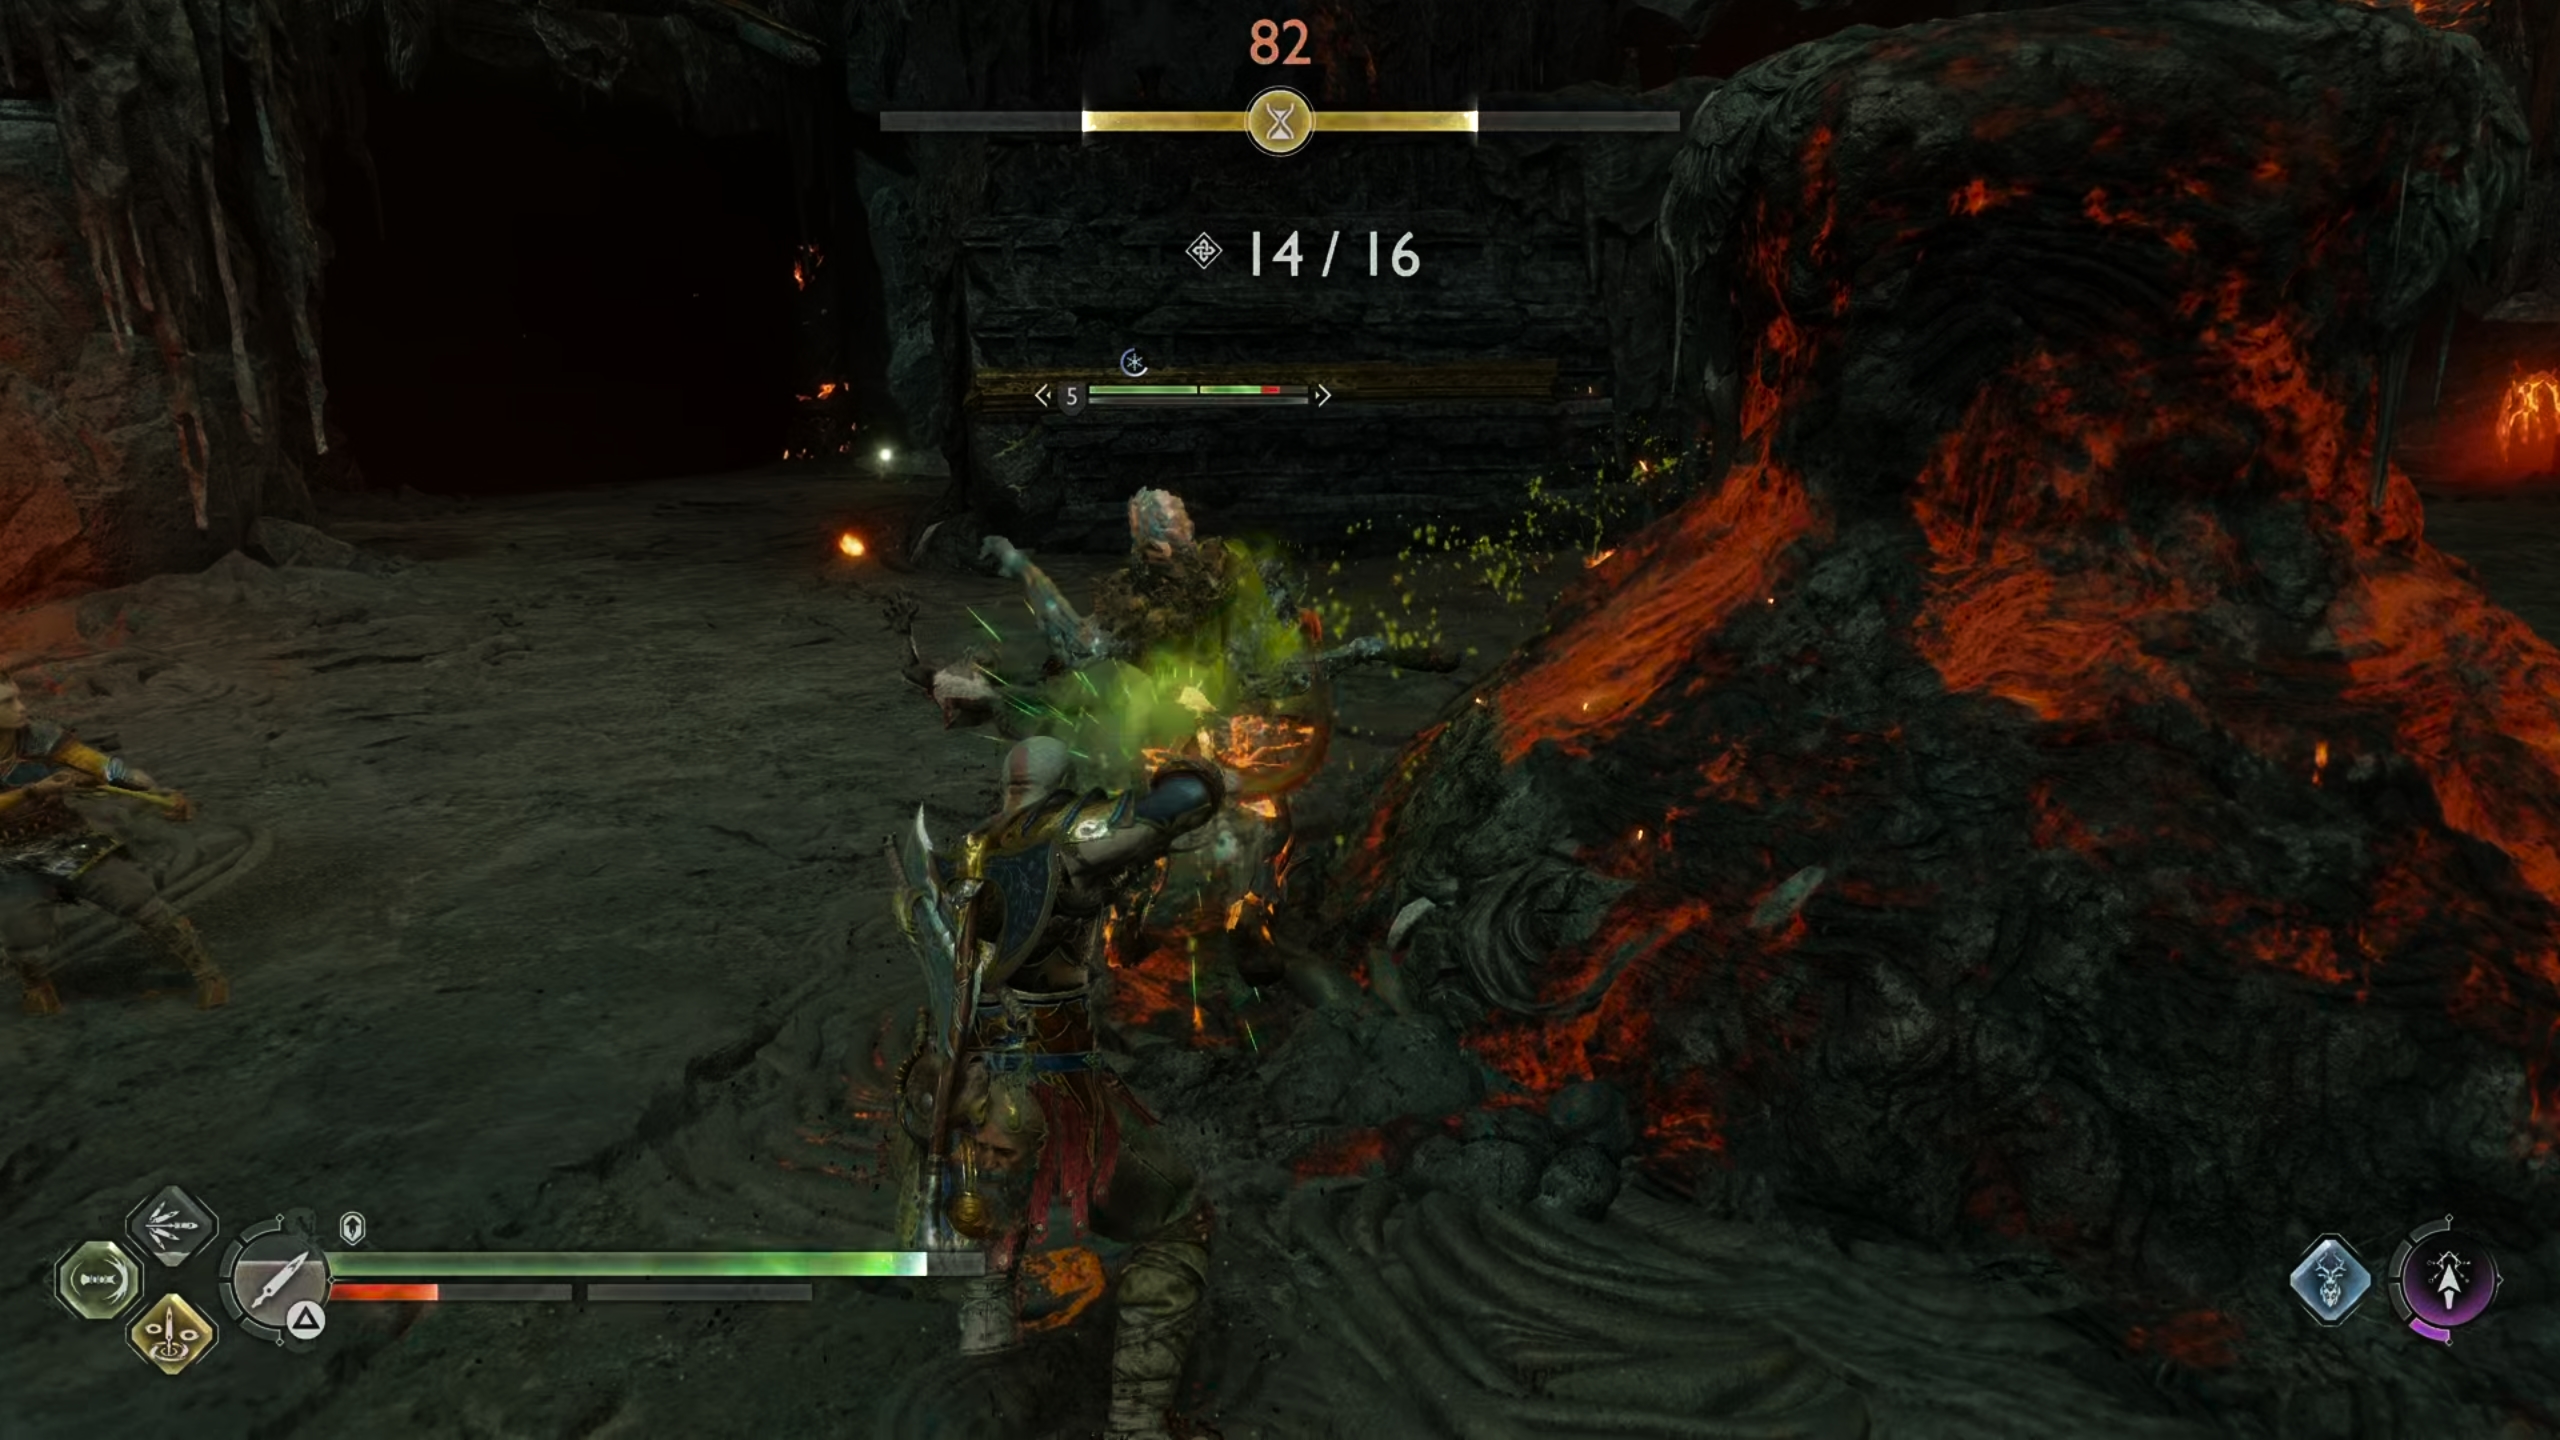 Follow the green spores from the enemy being buffed to find the Nokken.